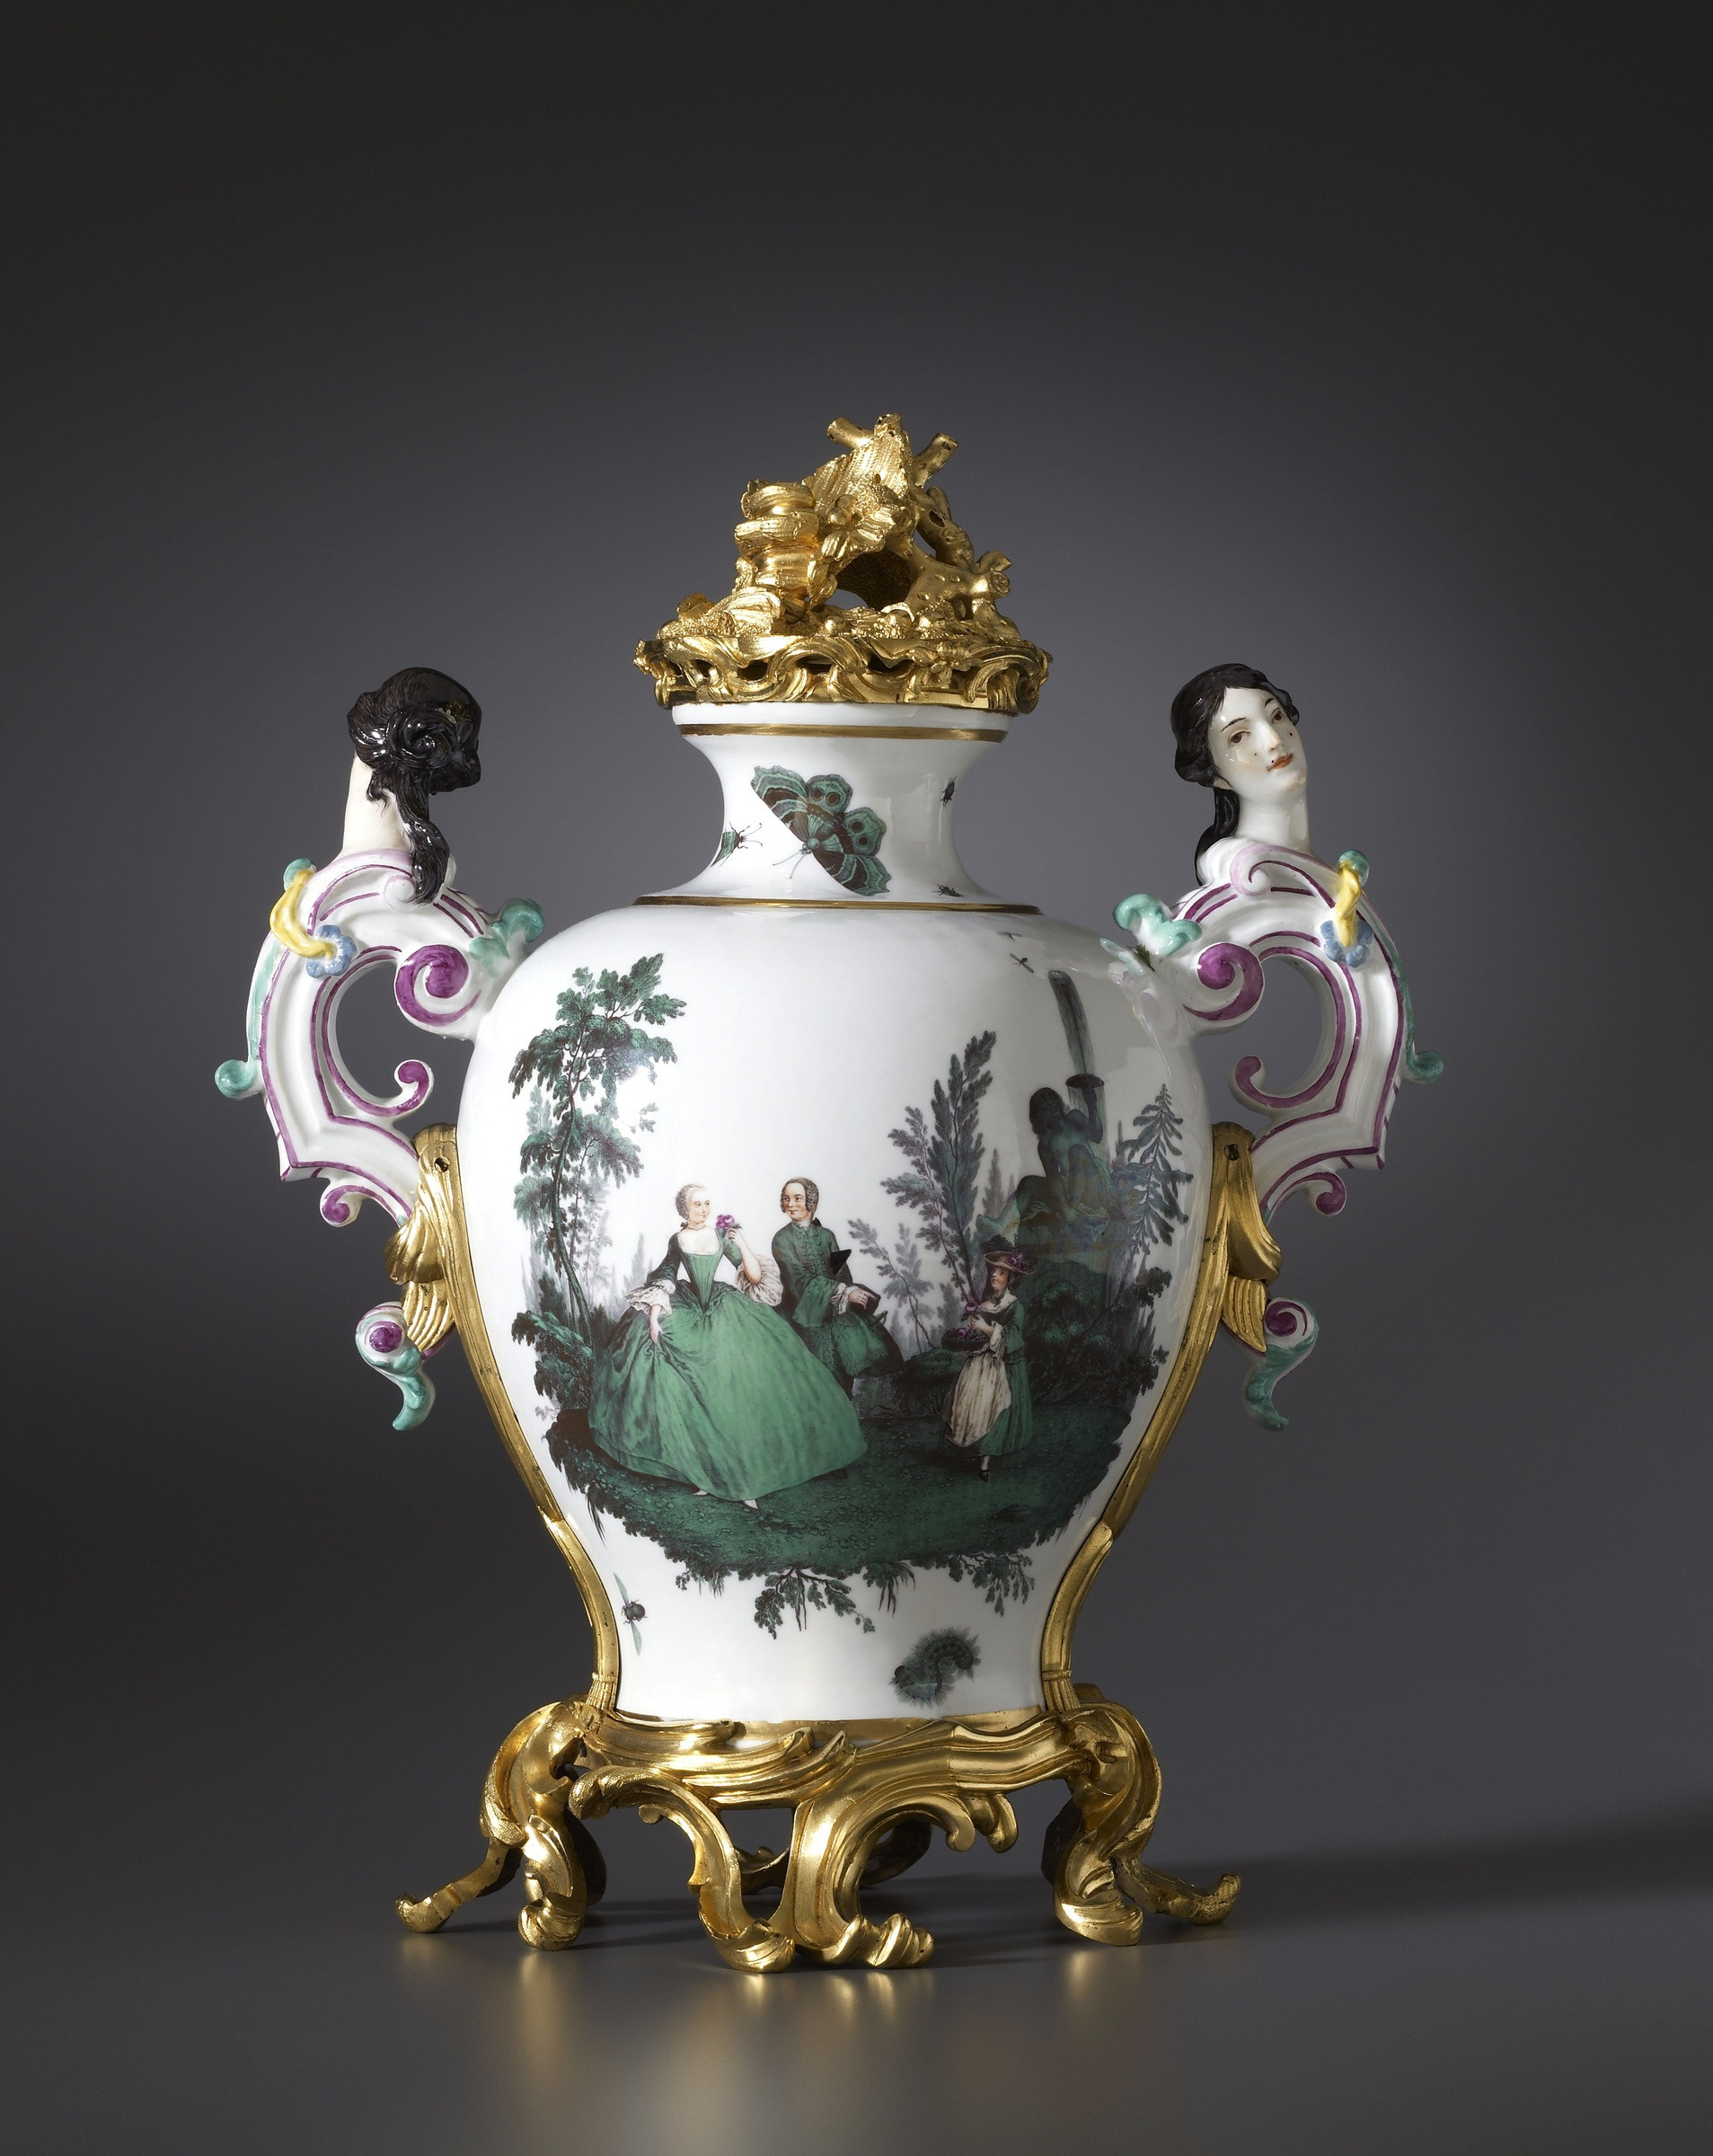 21 Cute Antique Vases for Sale 2024 free download antique vases for sale of meissen a louis xv vase by meissen almost certainly modelled by intended for a louis xv vase by meissen almost certainly modelled by johann joachim kac2a4ndler